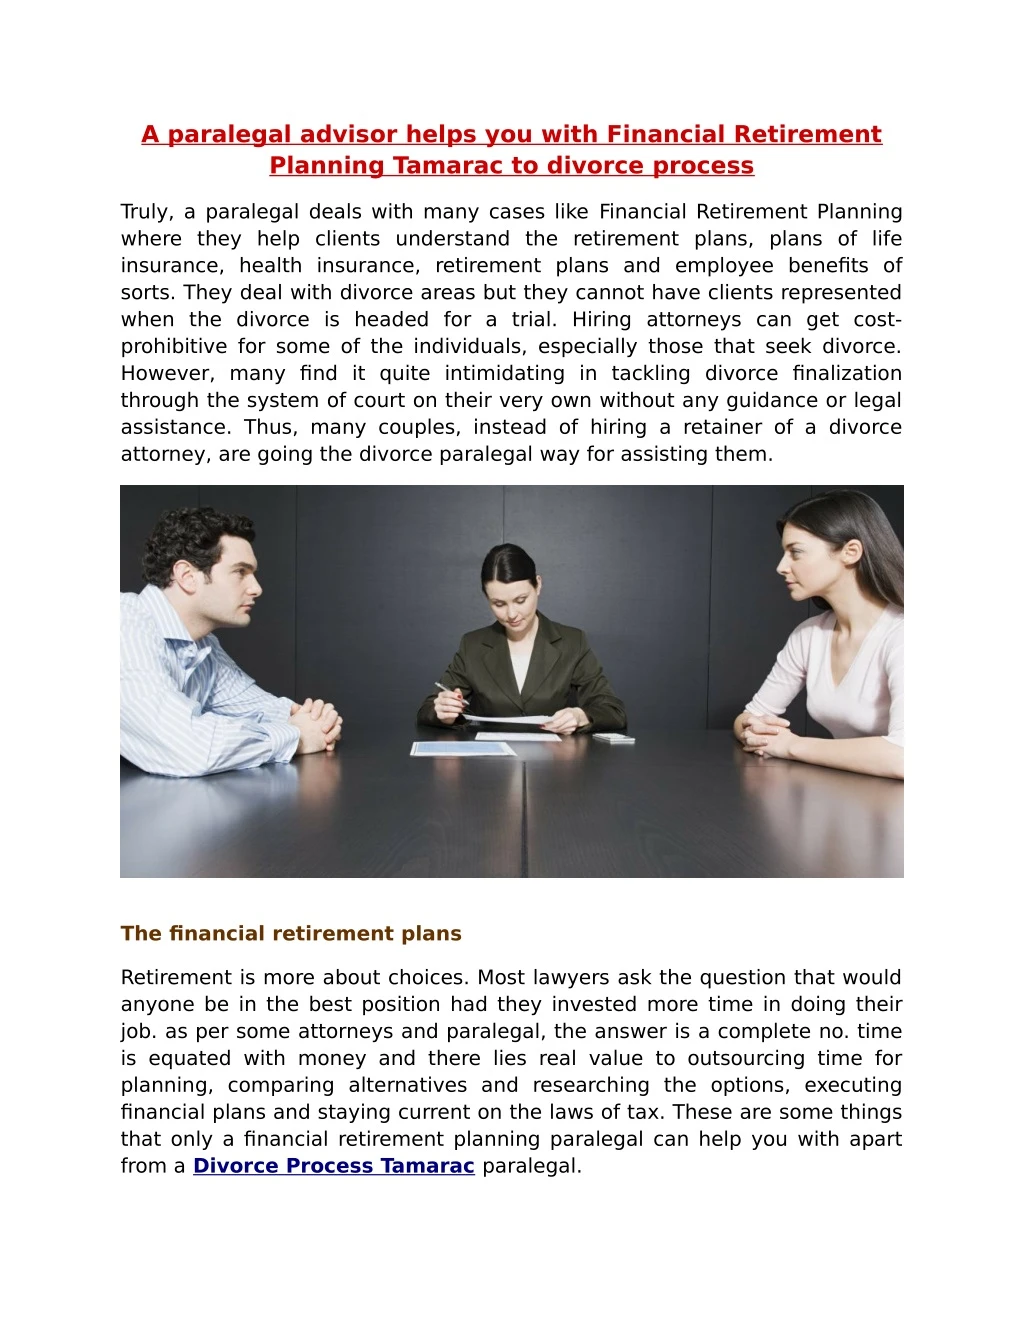 a paralegal advisor helps you with financial